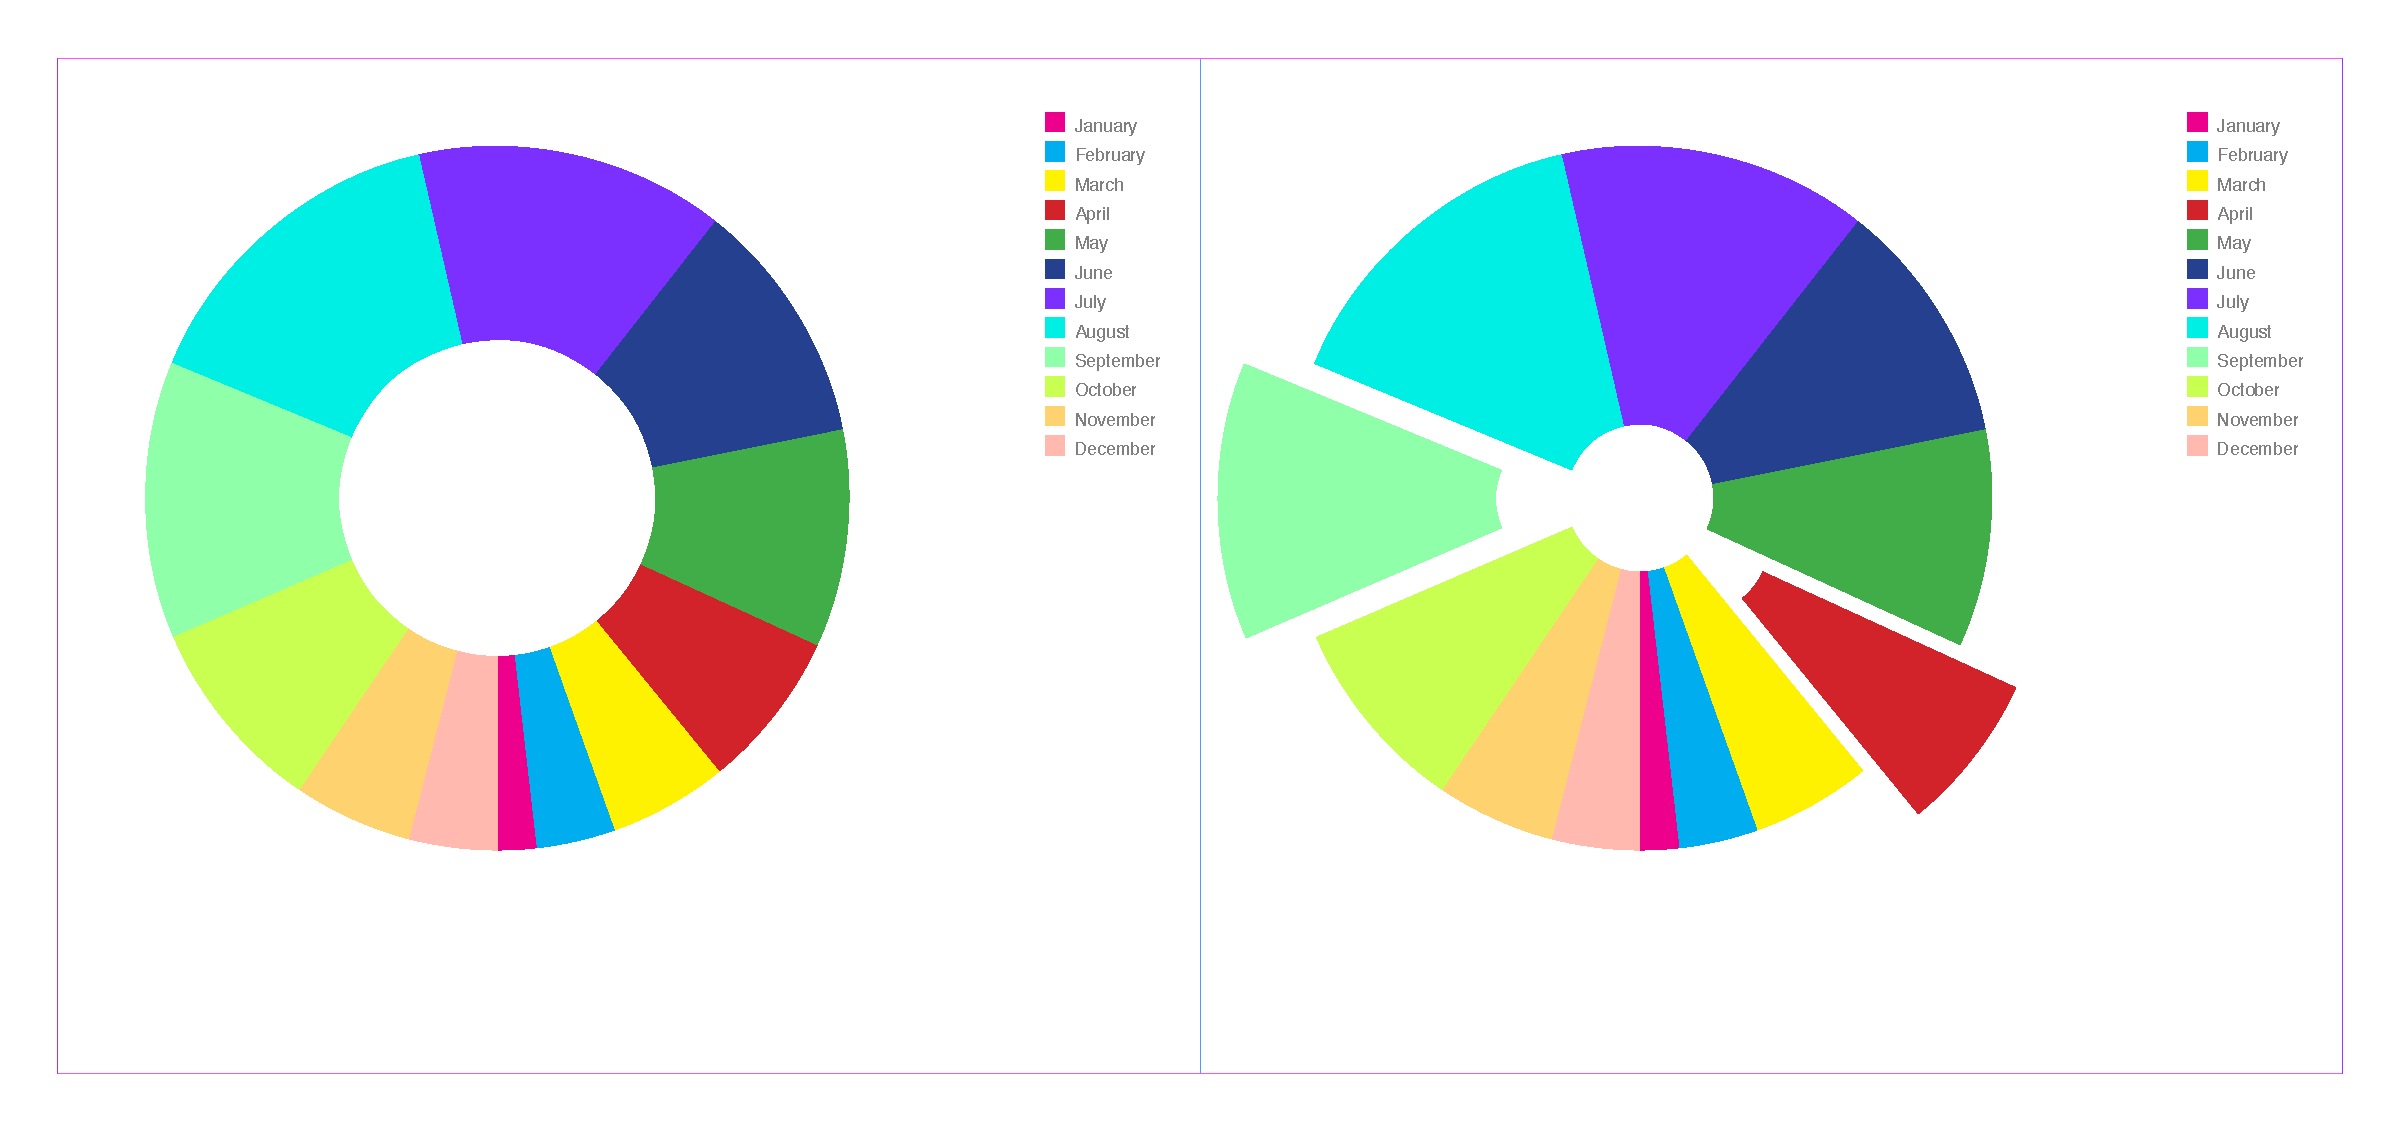 How To Make A Pie Chart Indesign